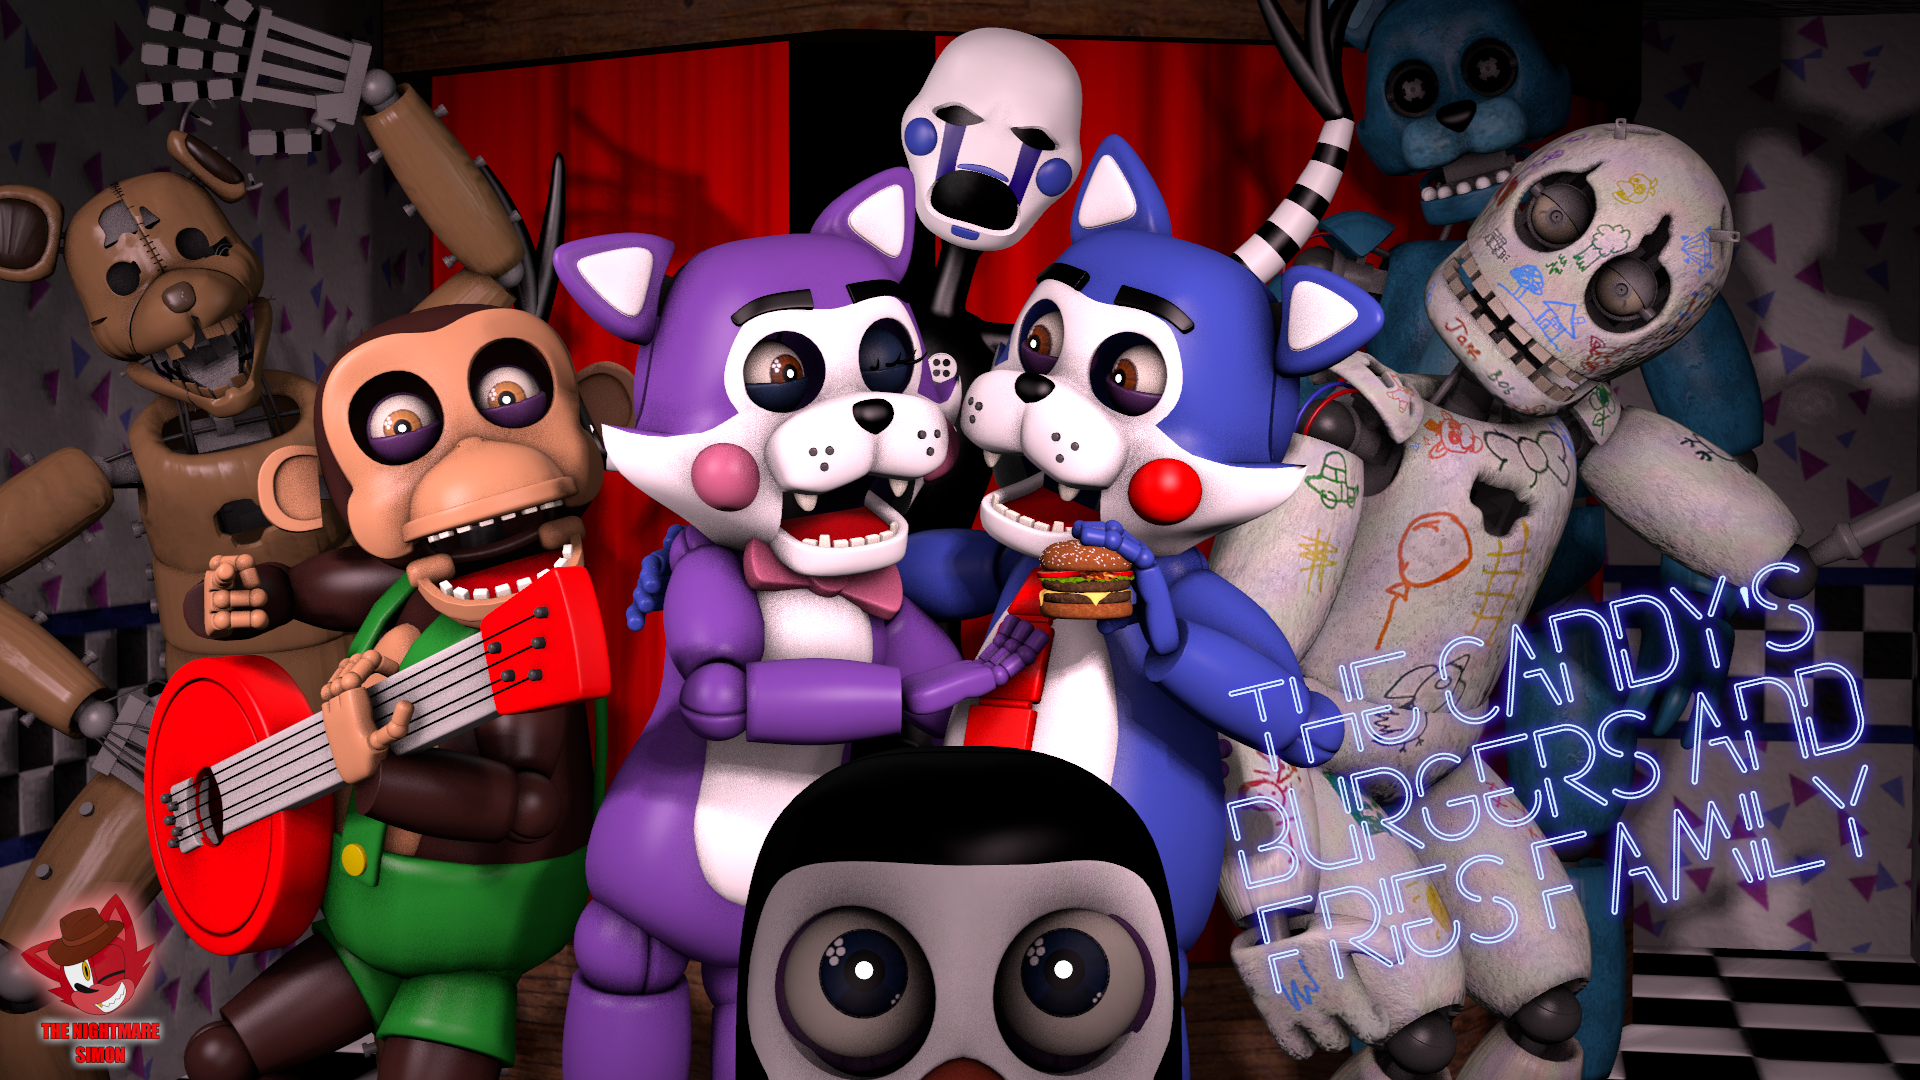 D Side Five Nights at Candy's Characters by AmyTheShark202 on DeviantArt